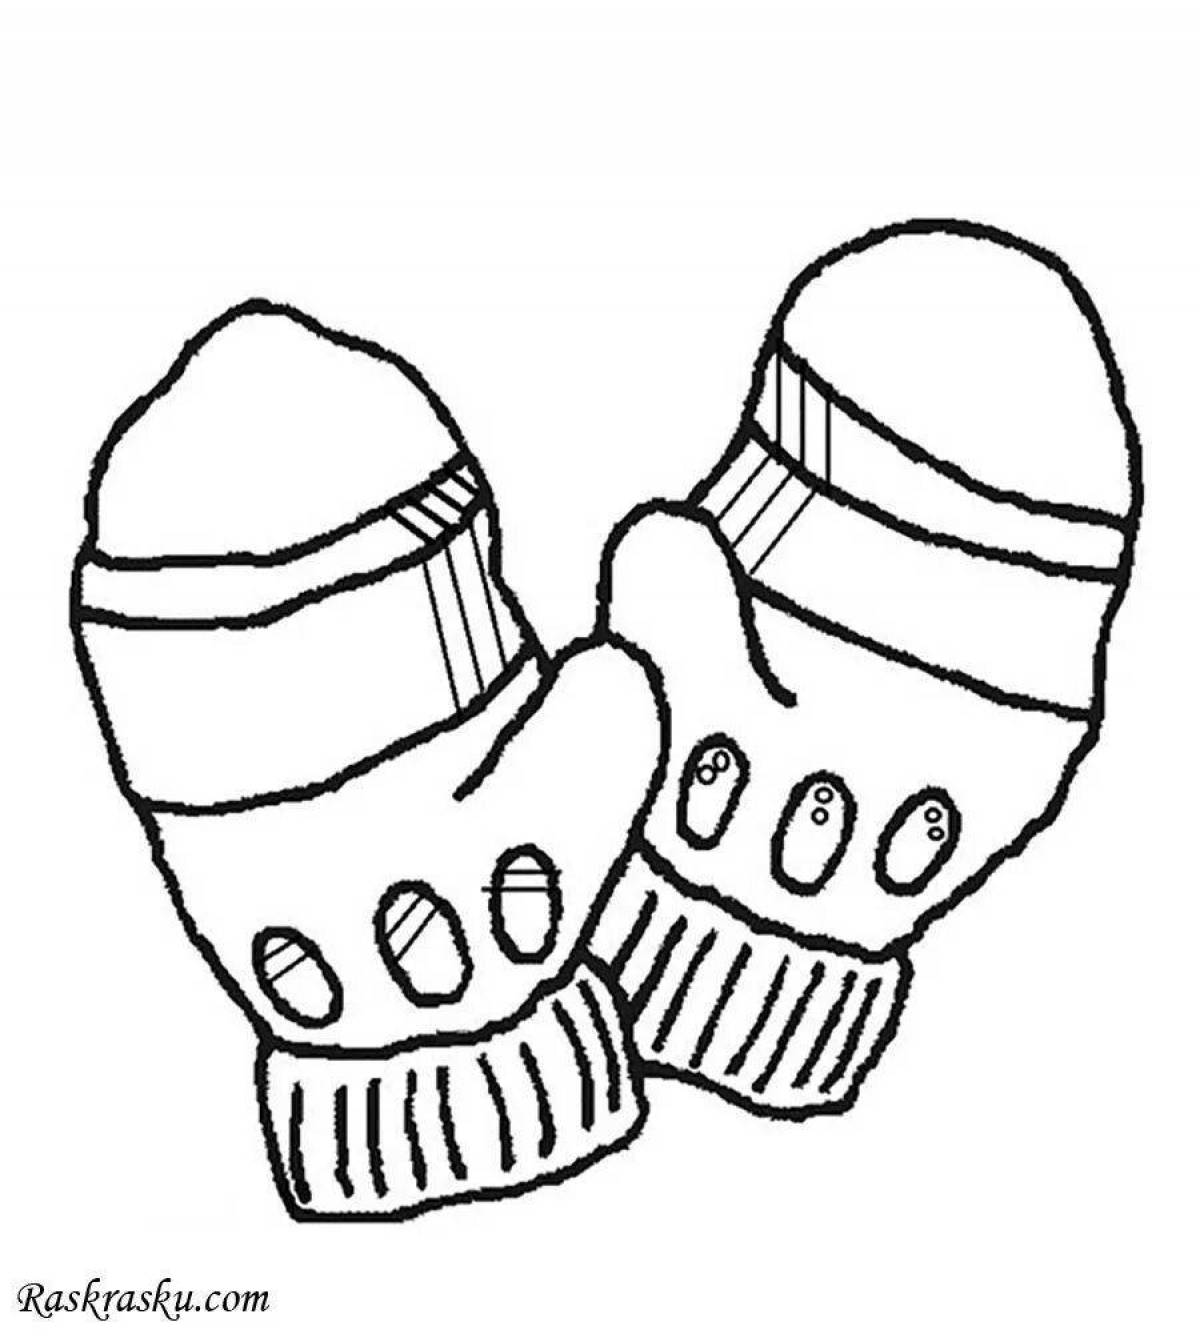 Baby mitten grand coloring page